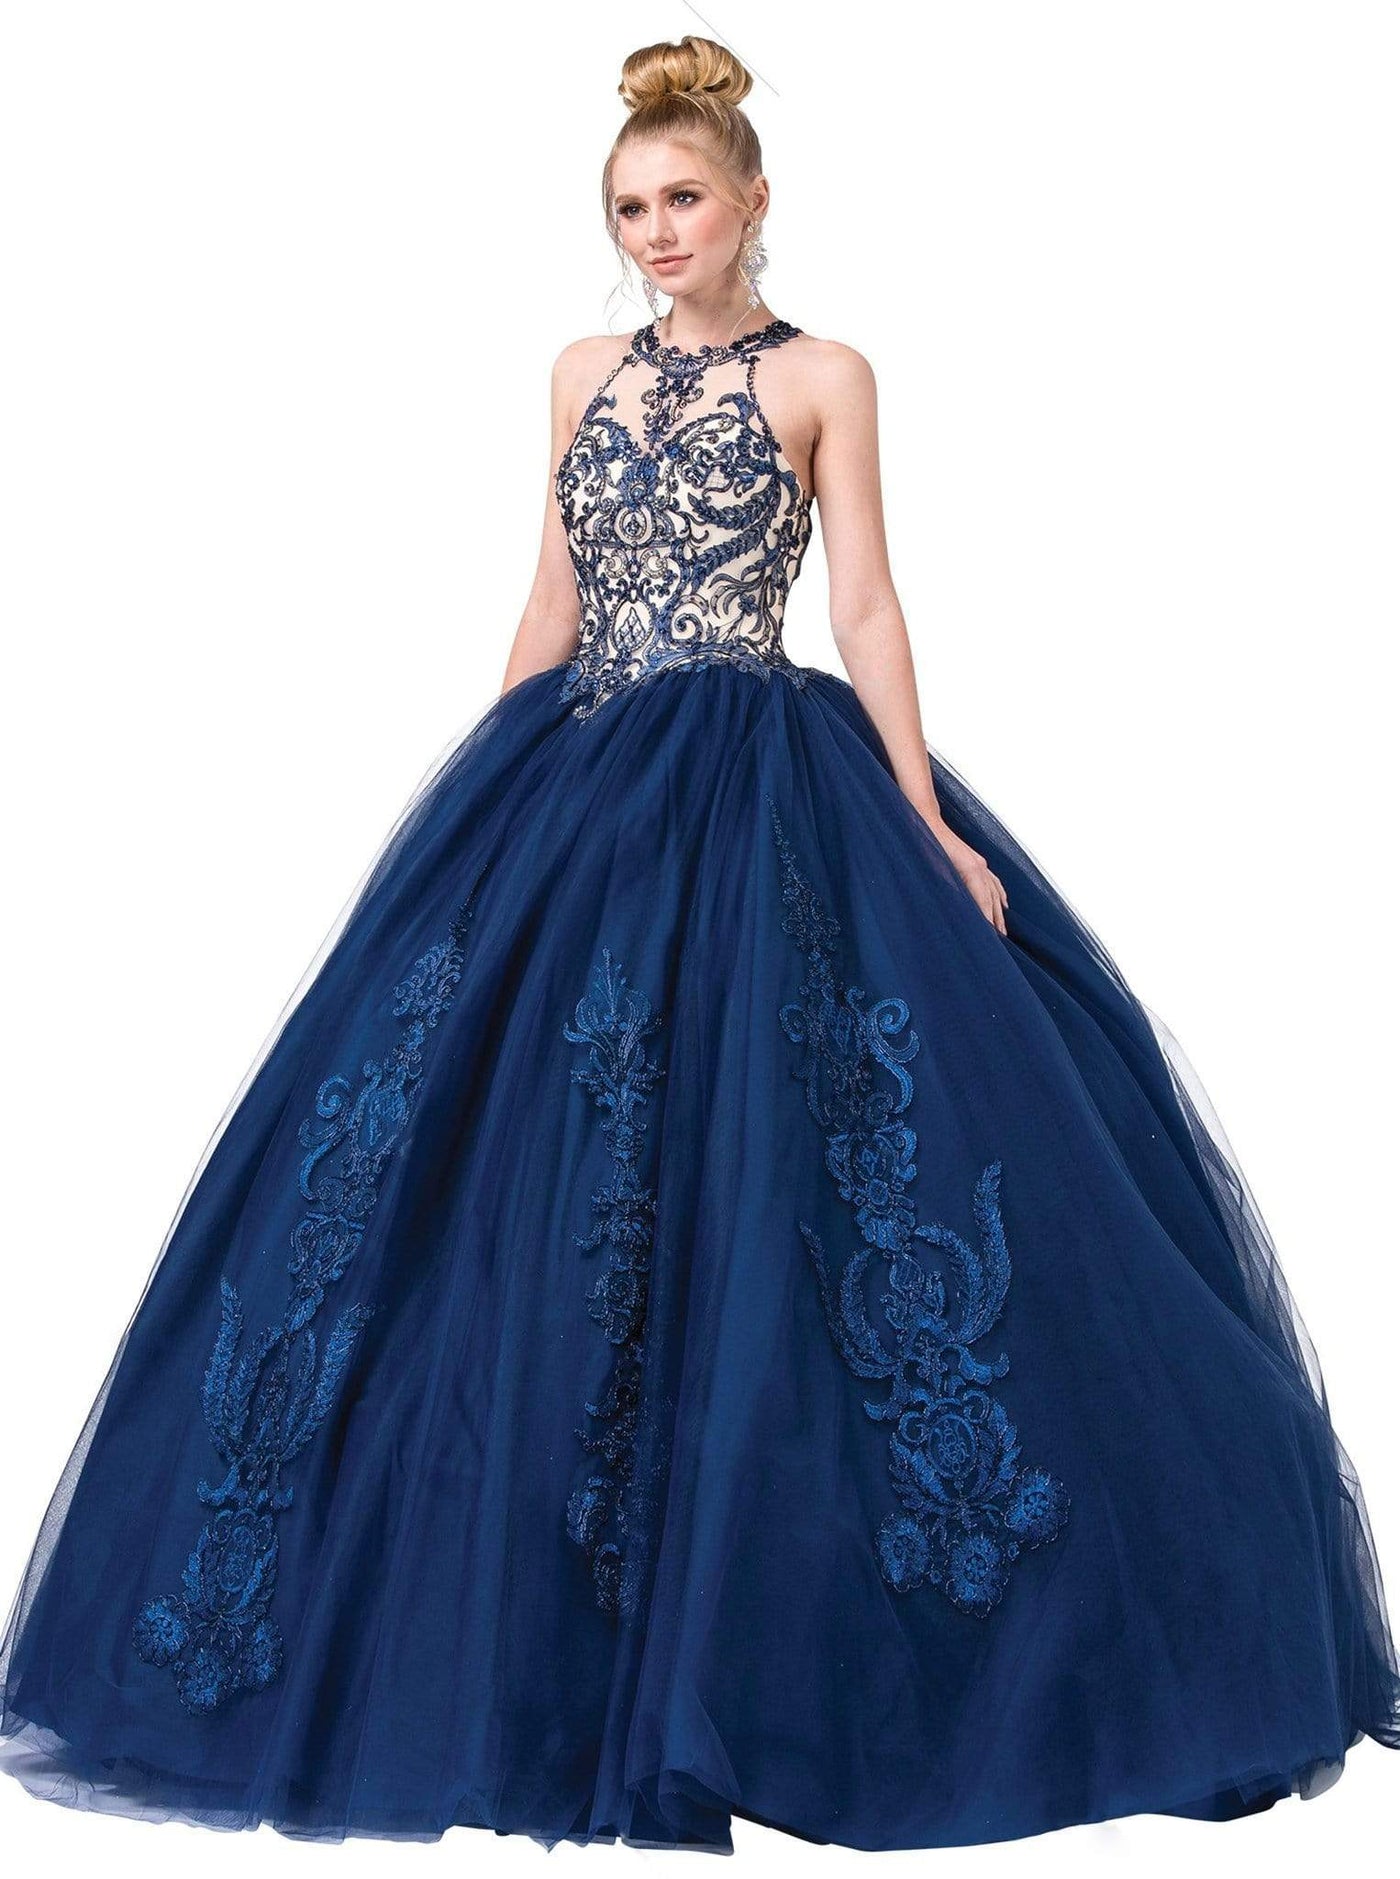 Dancing Queen - 1392 Embroidered Cutout Back Tulle Ballgown Special Occasion Dress XS / Navy